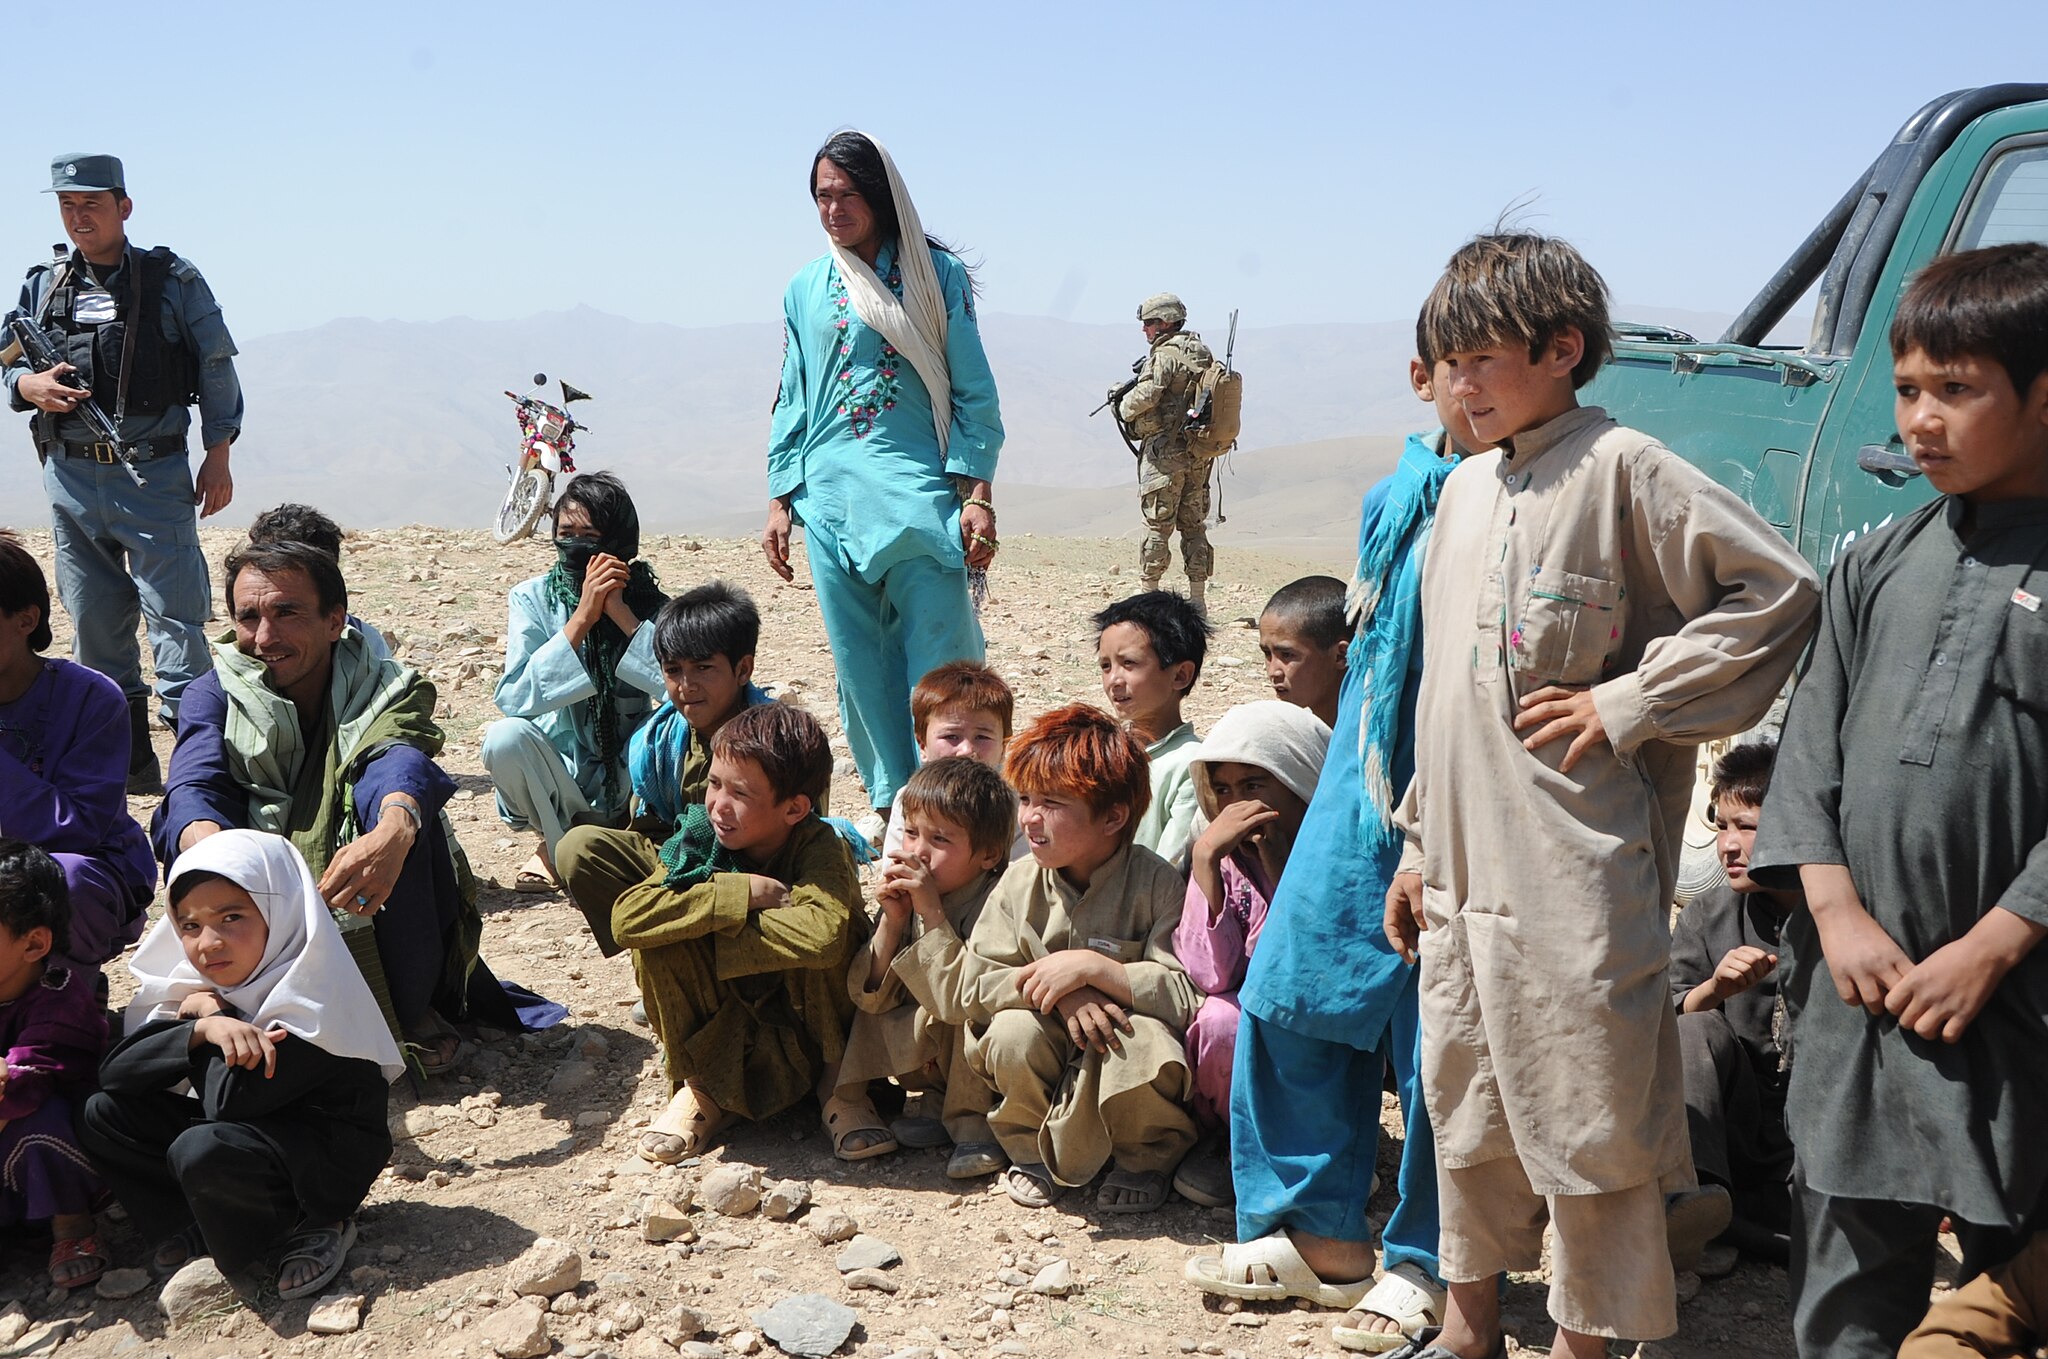 HRW: Afghanistan Hazara community at risk due to inadequate protections by authorities